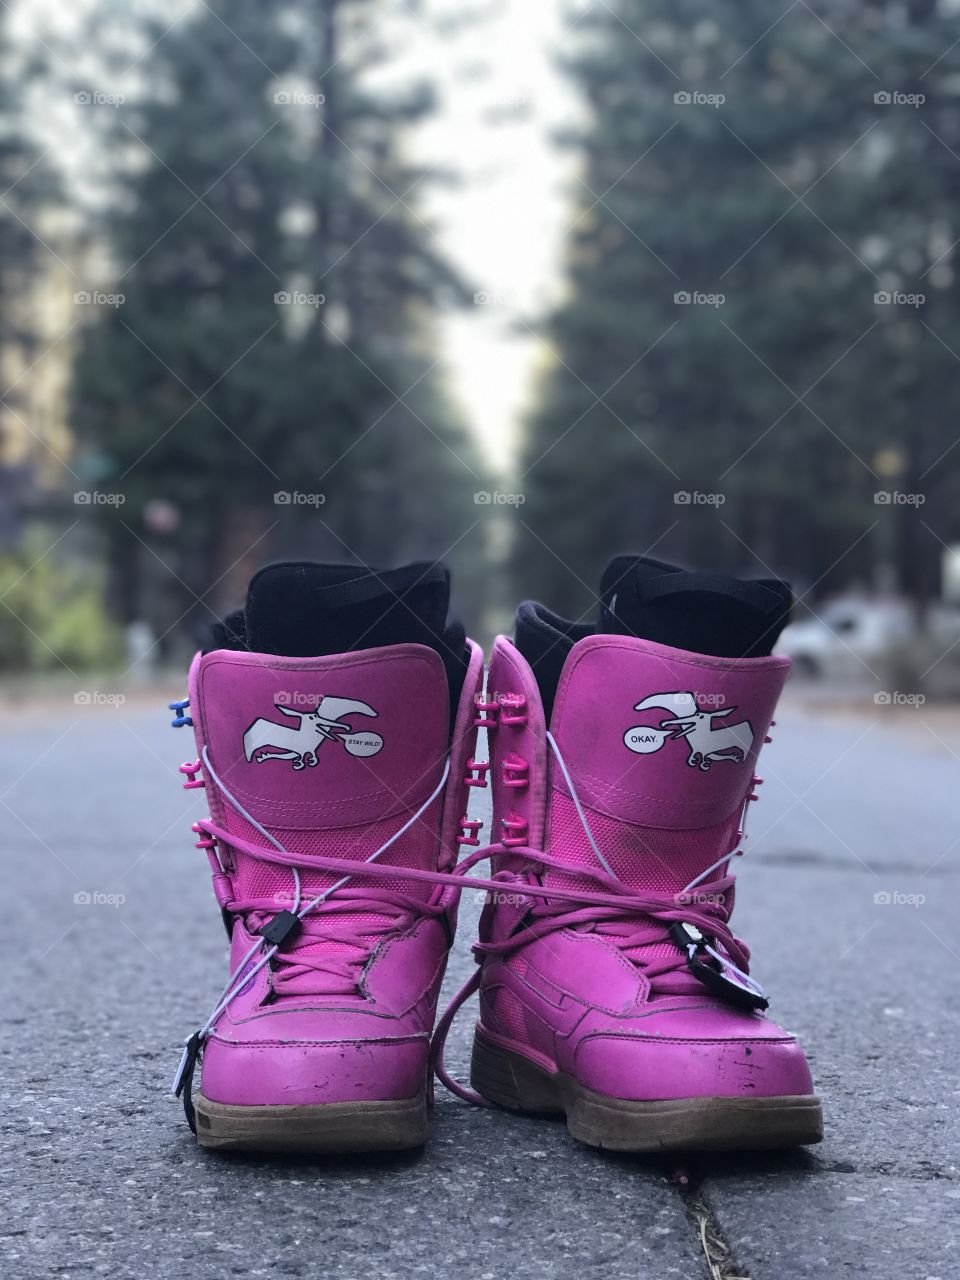 A bright pink pair of used and slightly worn snowboard boots on display in the middle of an empty mountain town road. 